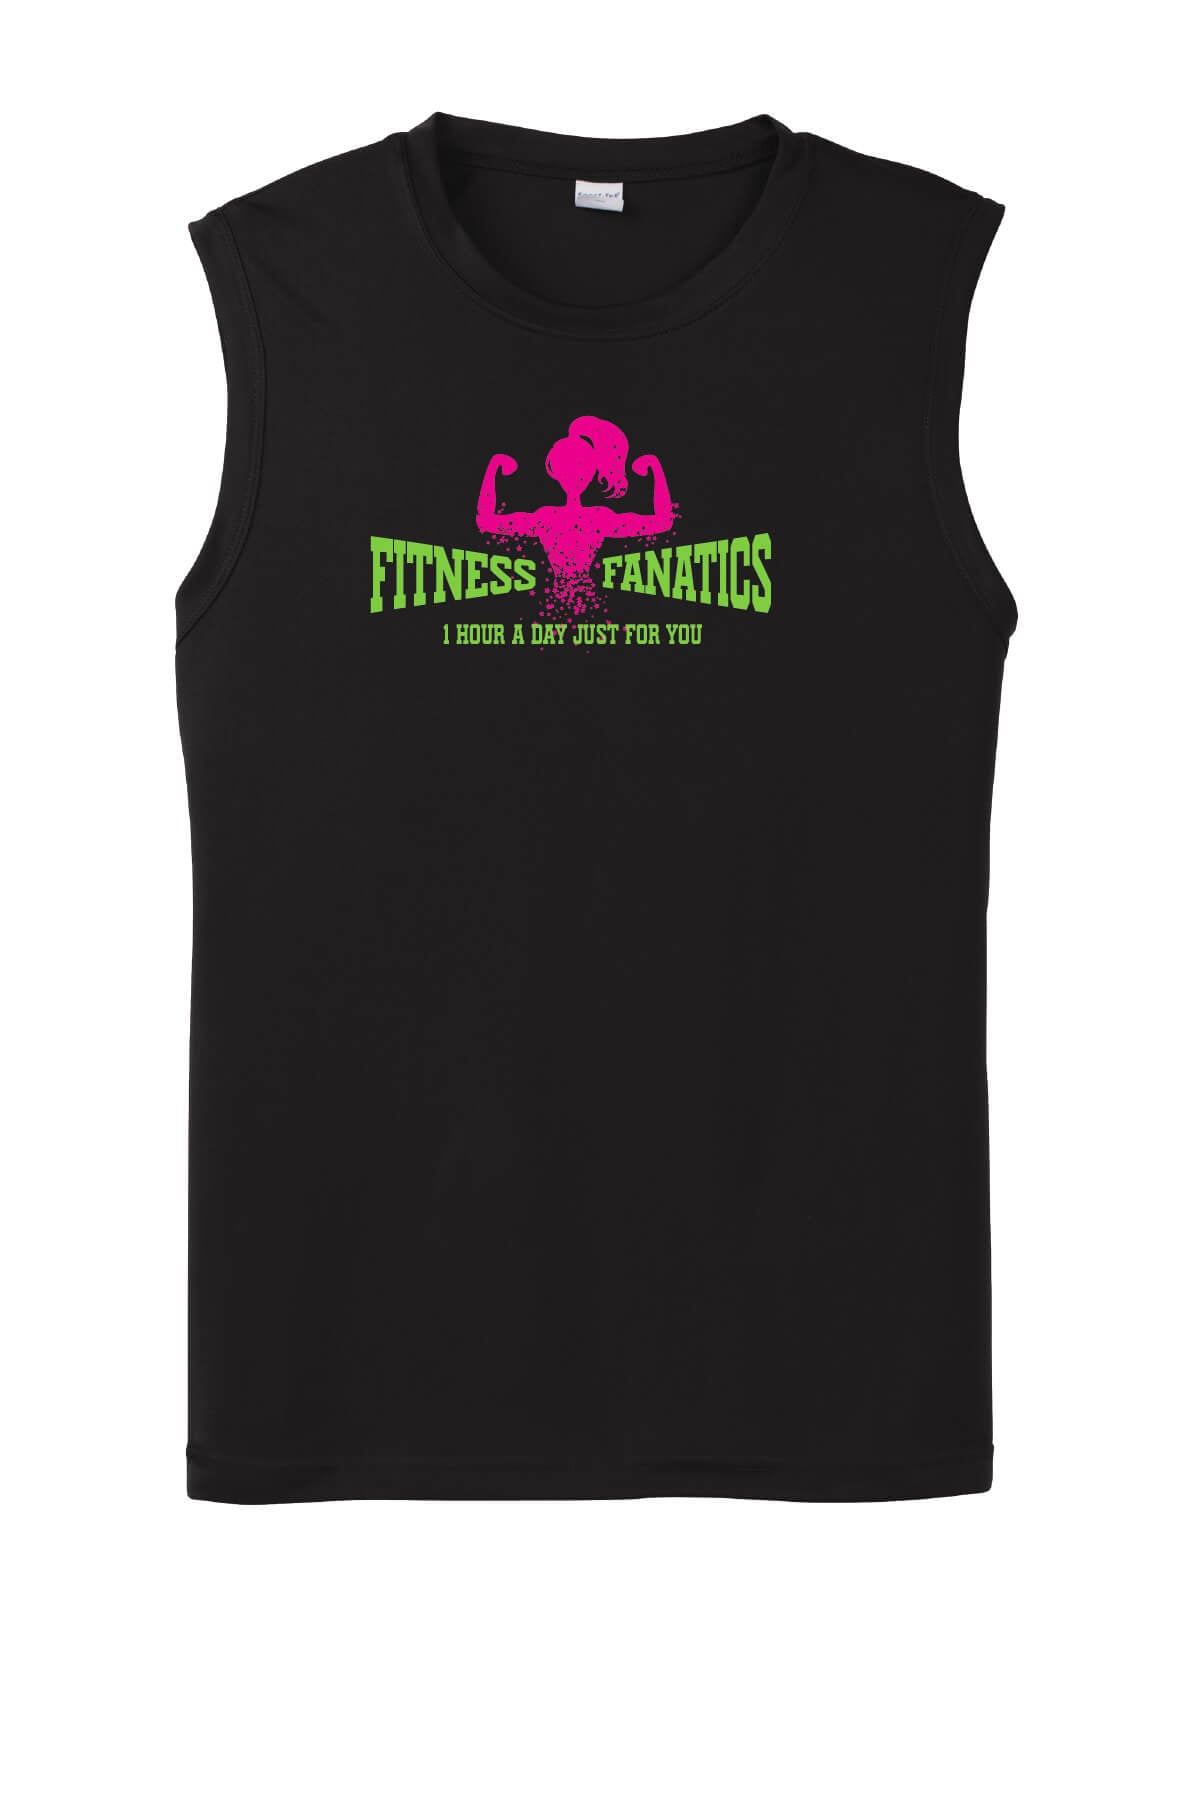 Mens Competitor Tank black with pink